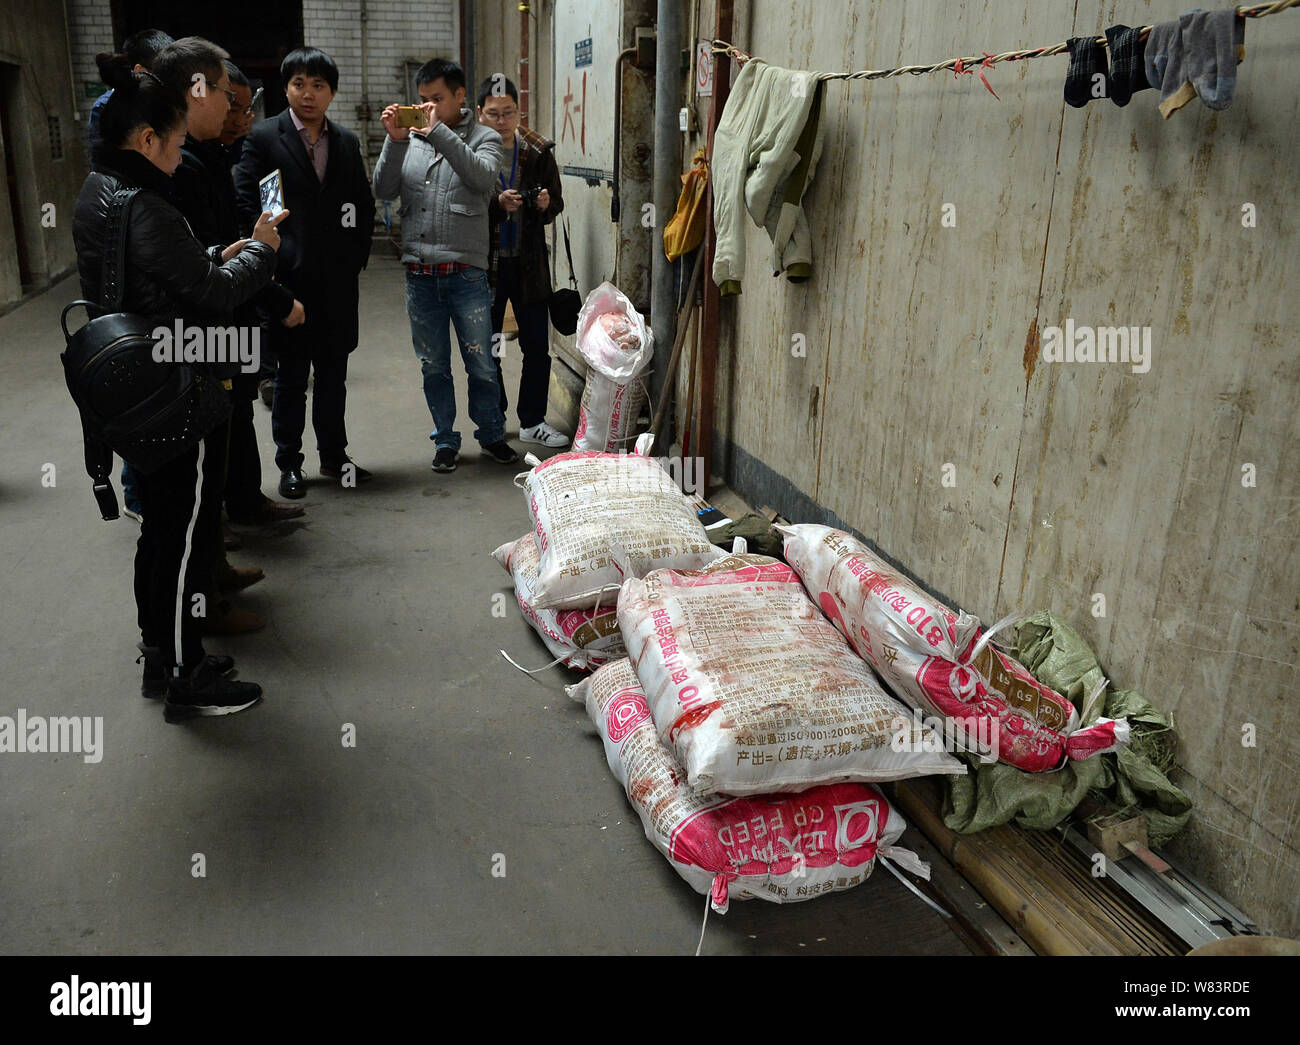 Bags of frozen cats butchered and to be sold to restaurants by Chinese 'animal lover' Huang Fuping are pictured in his slaughterhouse in Shunjiang vil Stock Photo